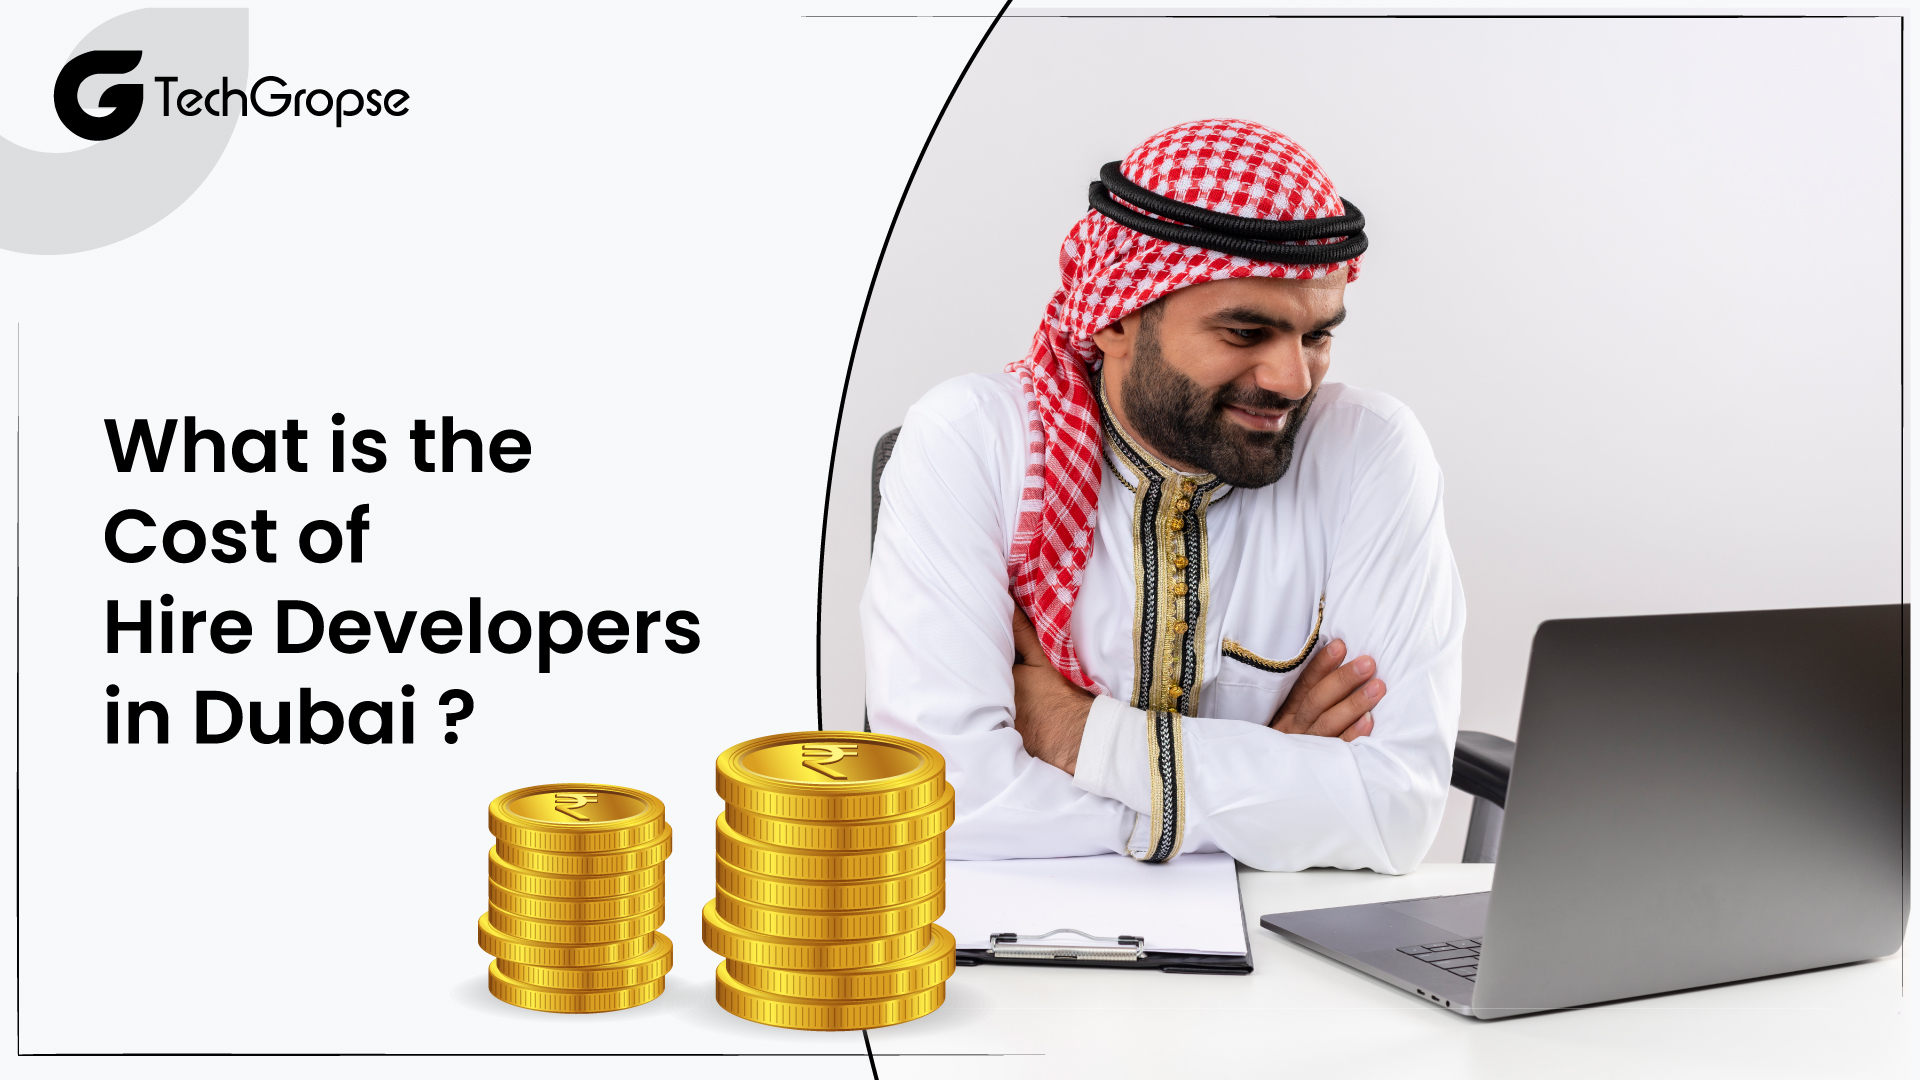 What is the Cost of Hire Developers in Dubai?